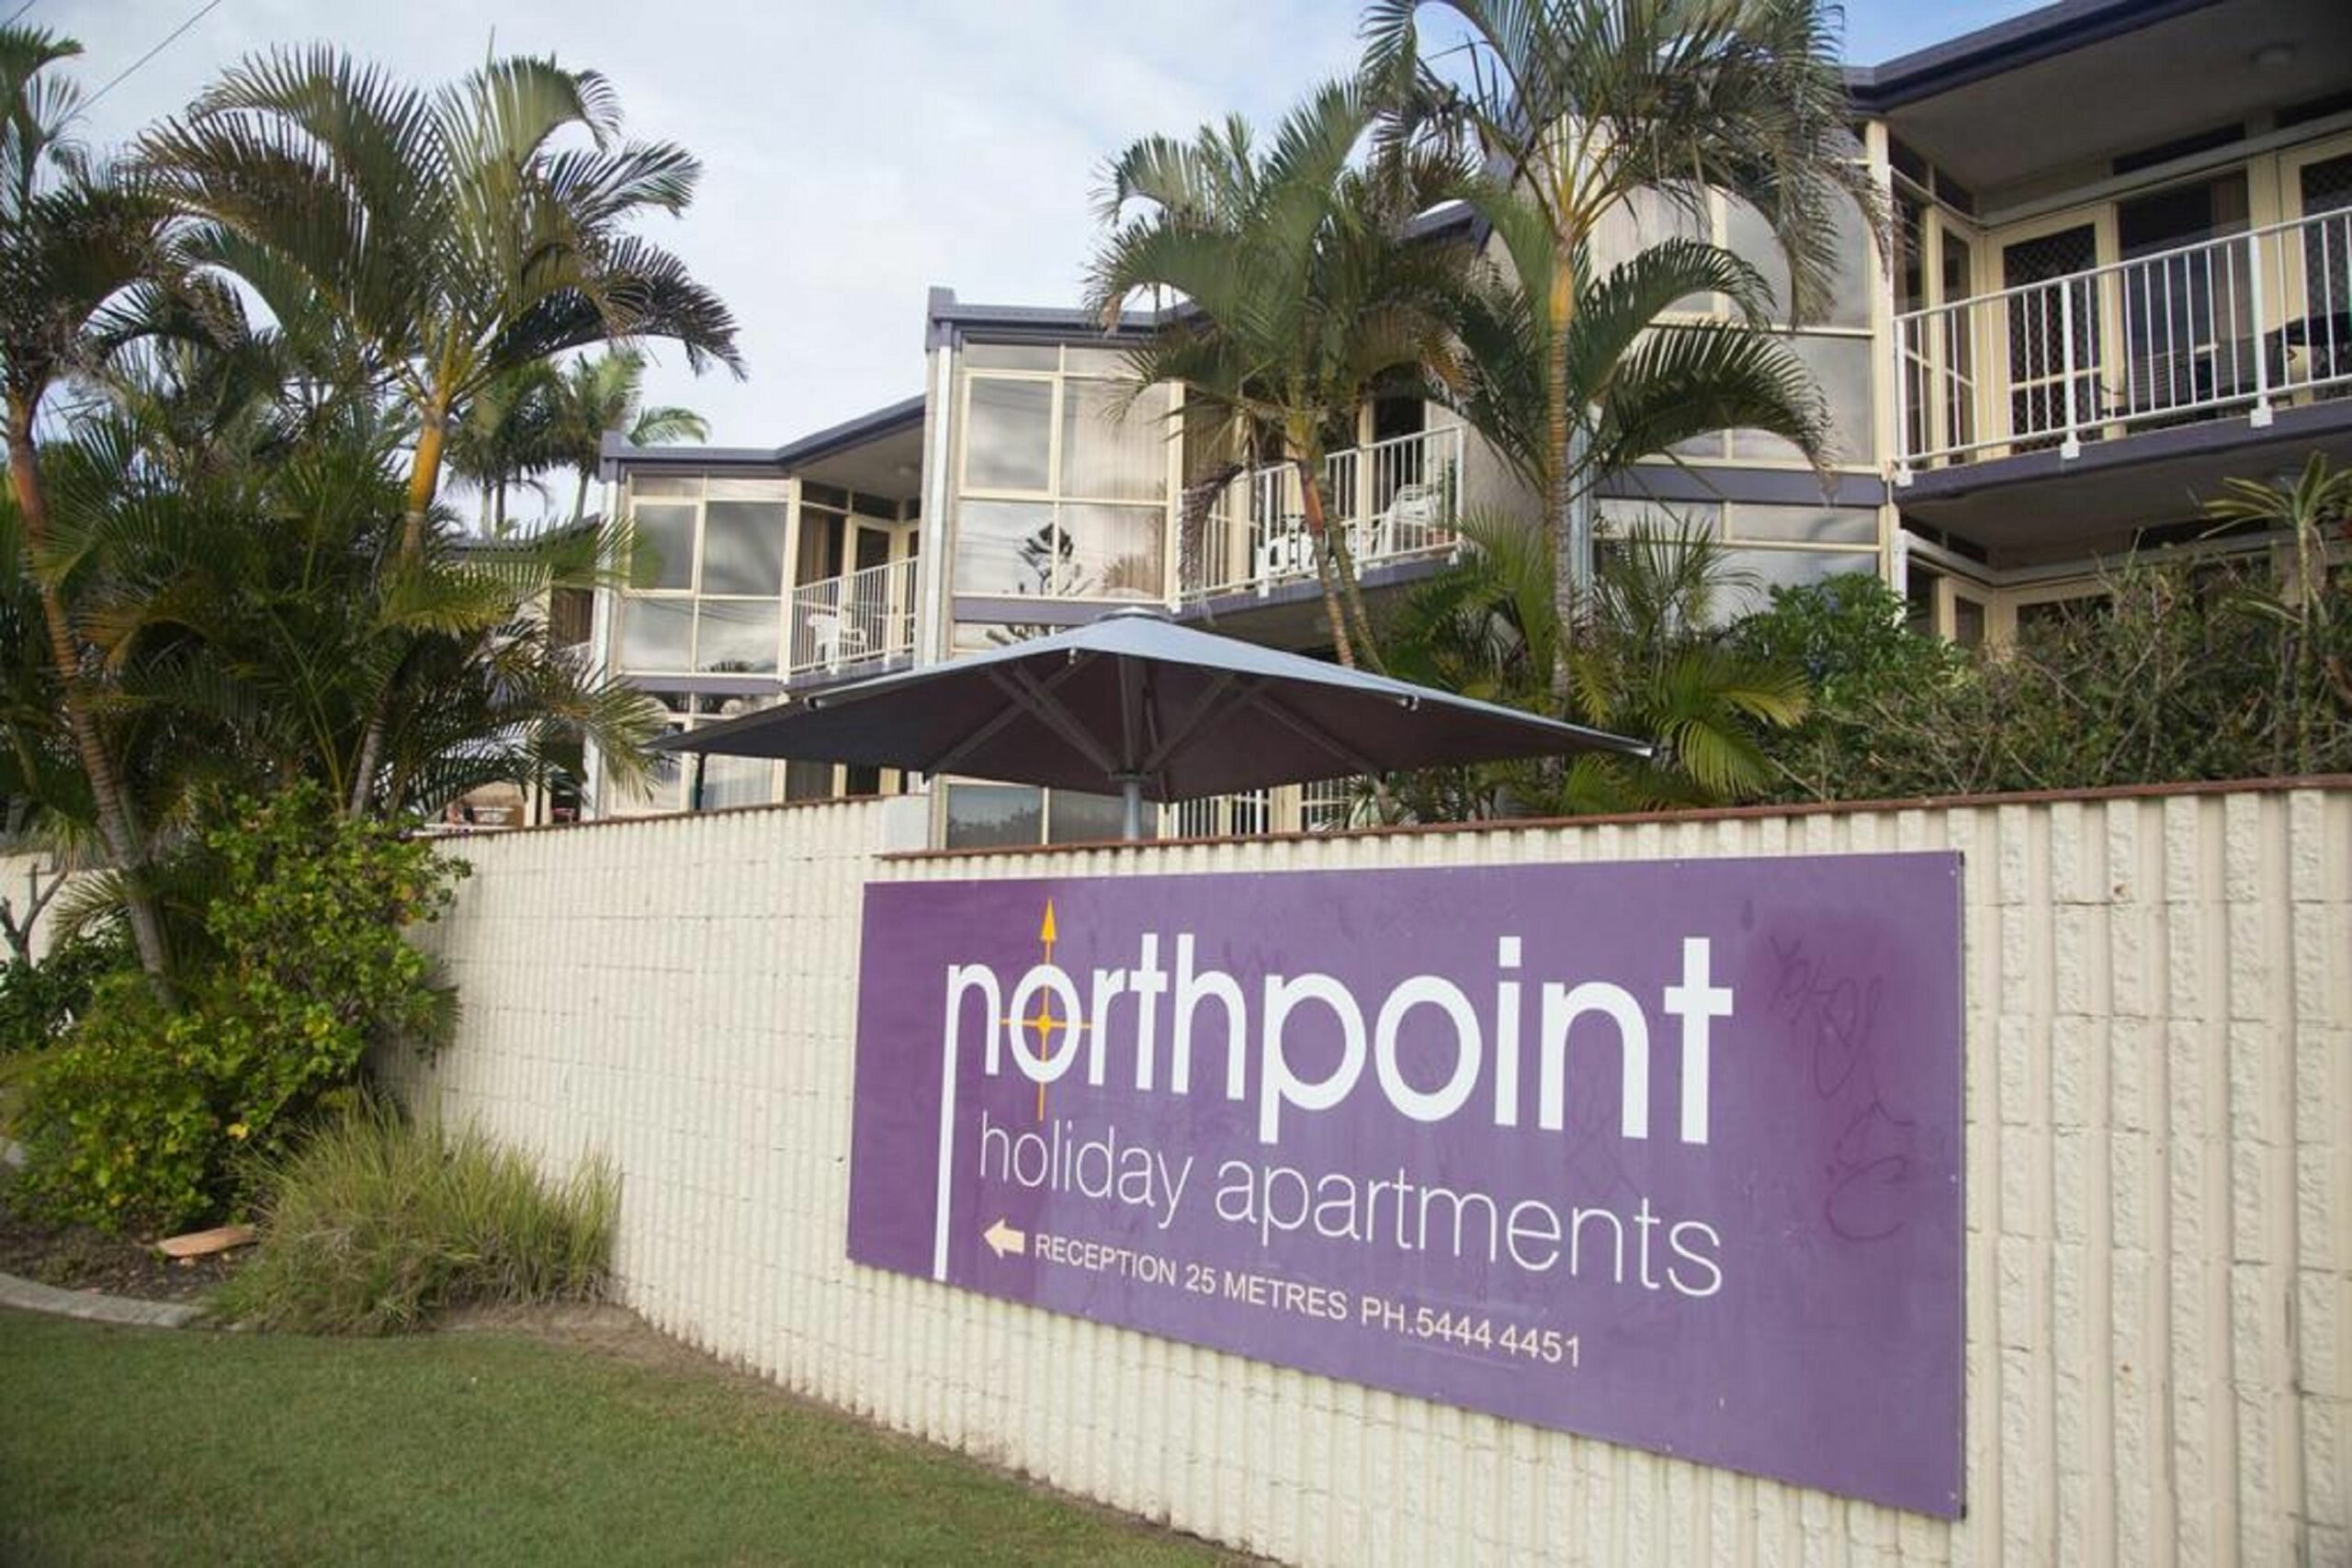 Northpoint Holiday Apartments